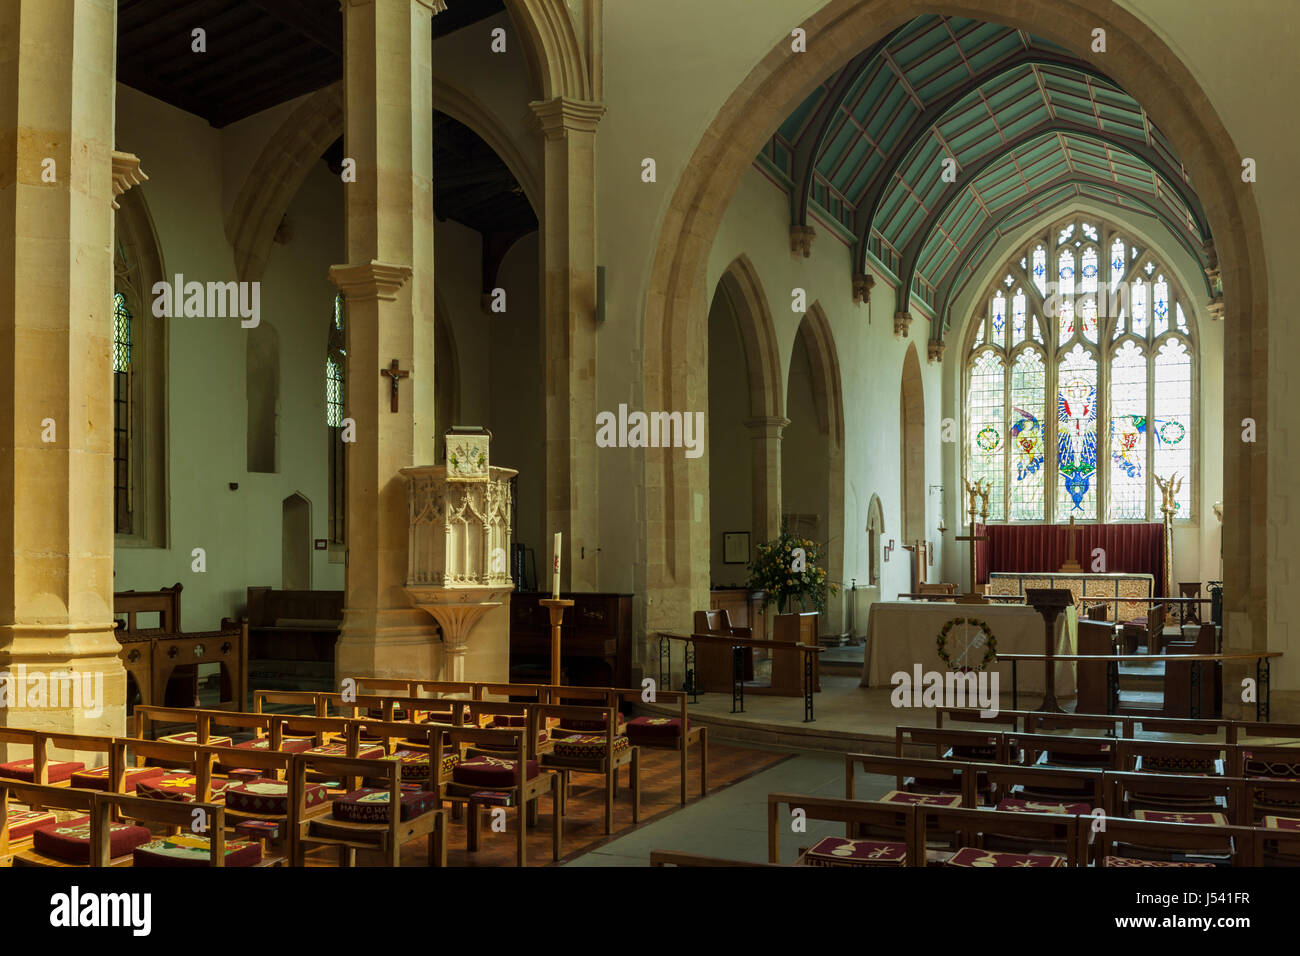 Interior of St Peter & Paul church in Northleach, Gloucestershire, England. Stock Photo